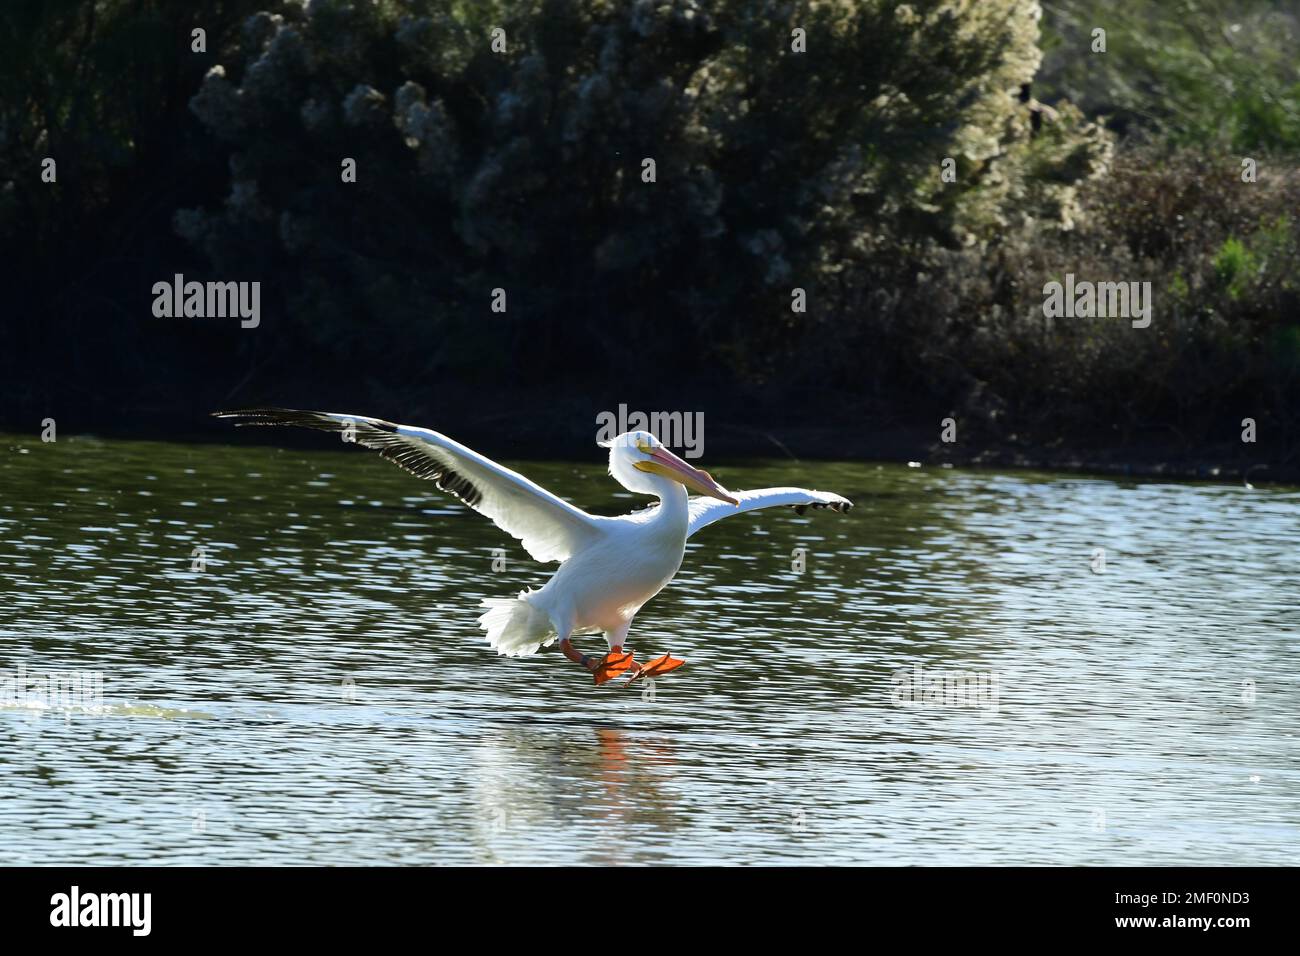 Great White Pelican in flight landing on a pond Stock Photo